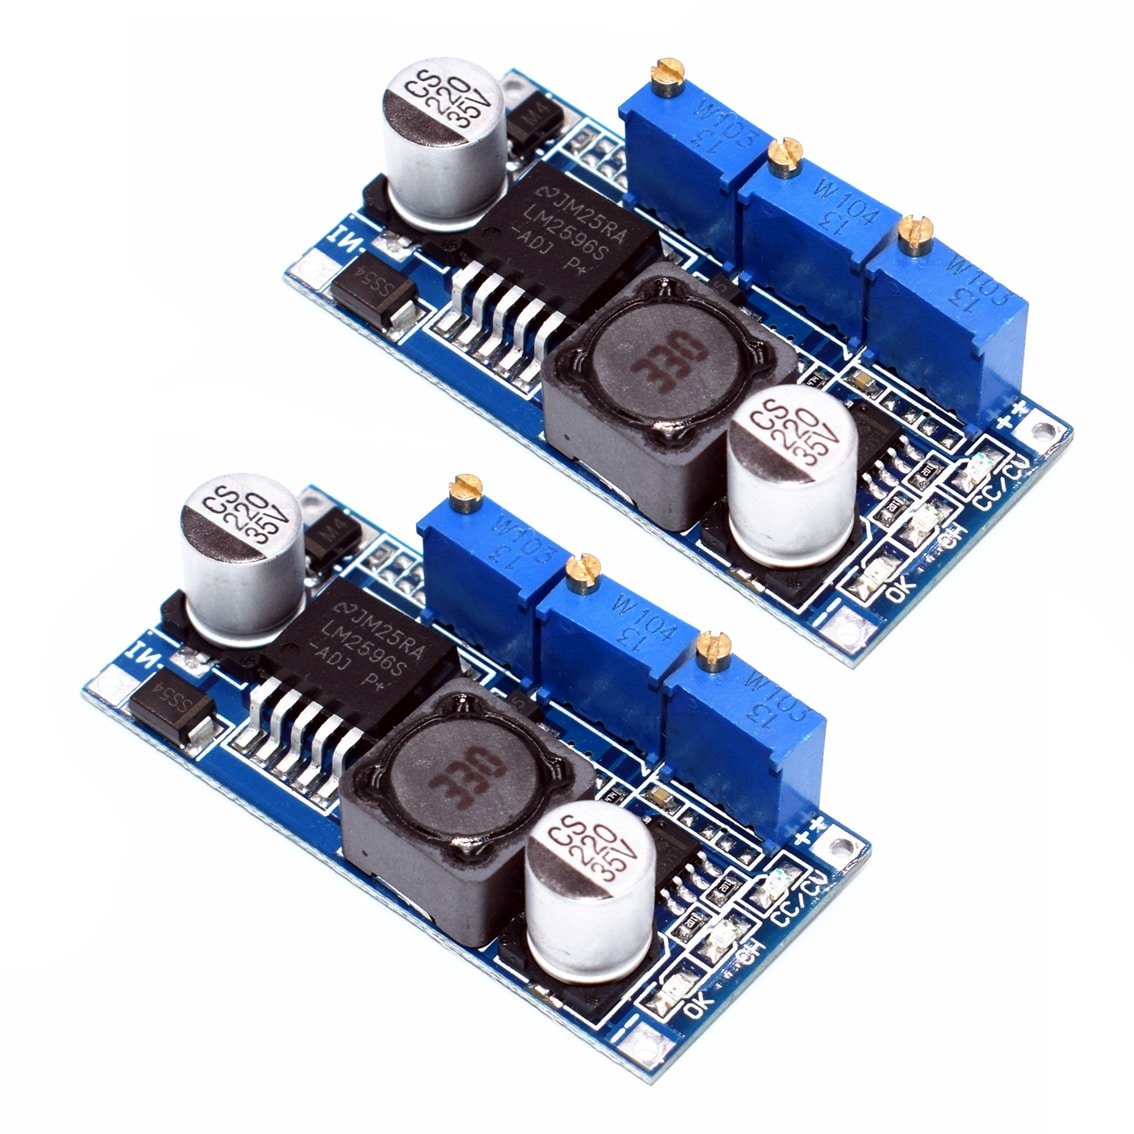 10 Pack LM2596 LED Constant Current & Constant Voltage Driver Power Supply Module 